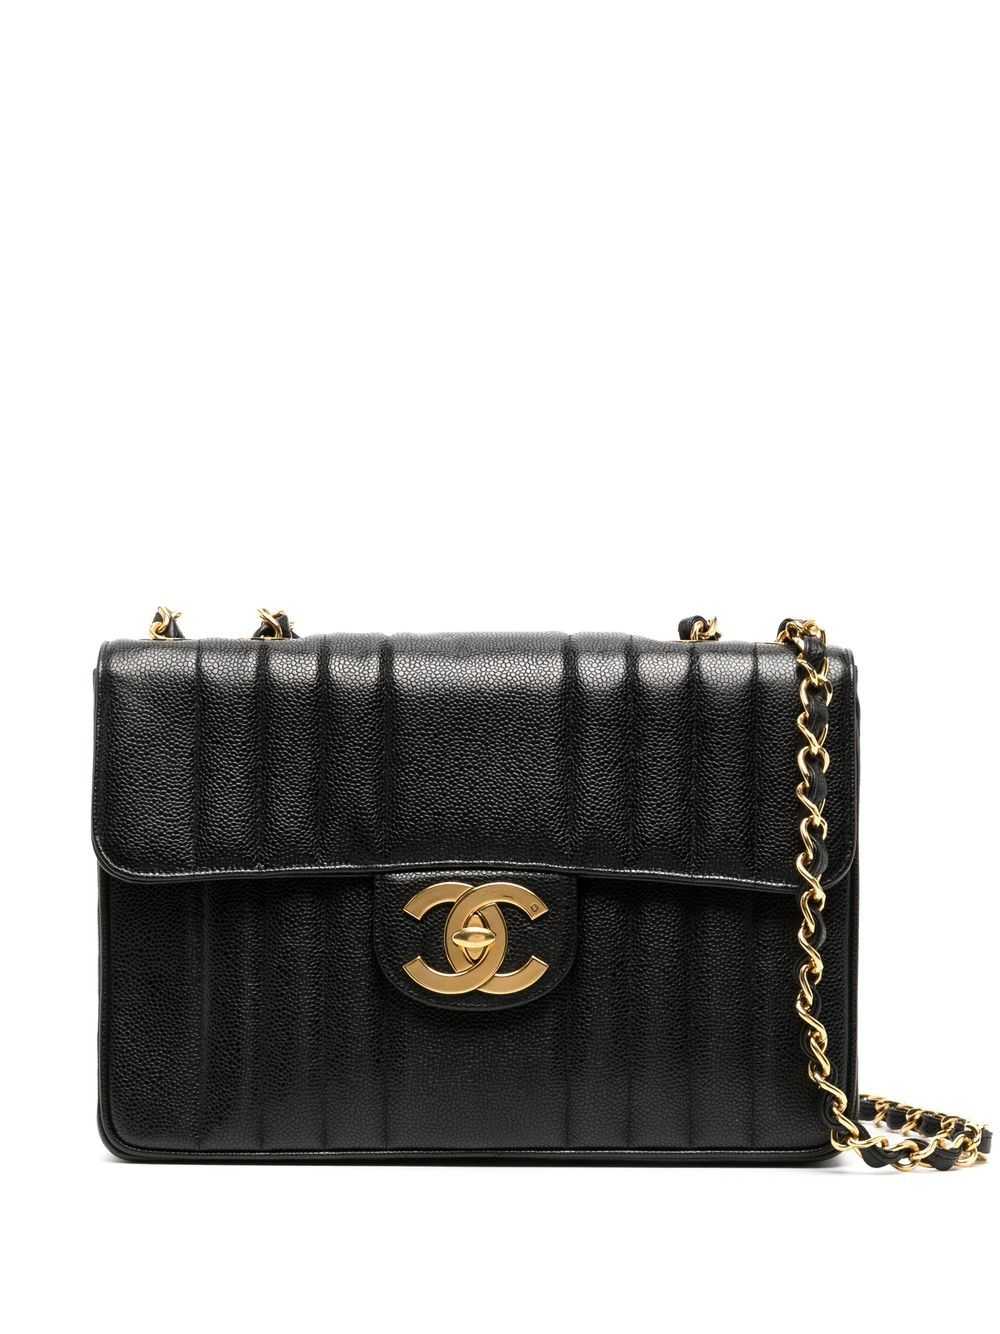 CHANEL Pre-Owned 1992 Mademoiselle Classic Flap s… - image 1